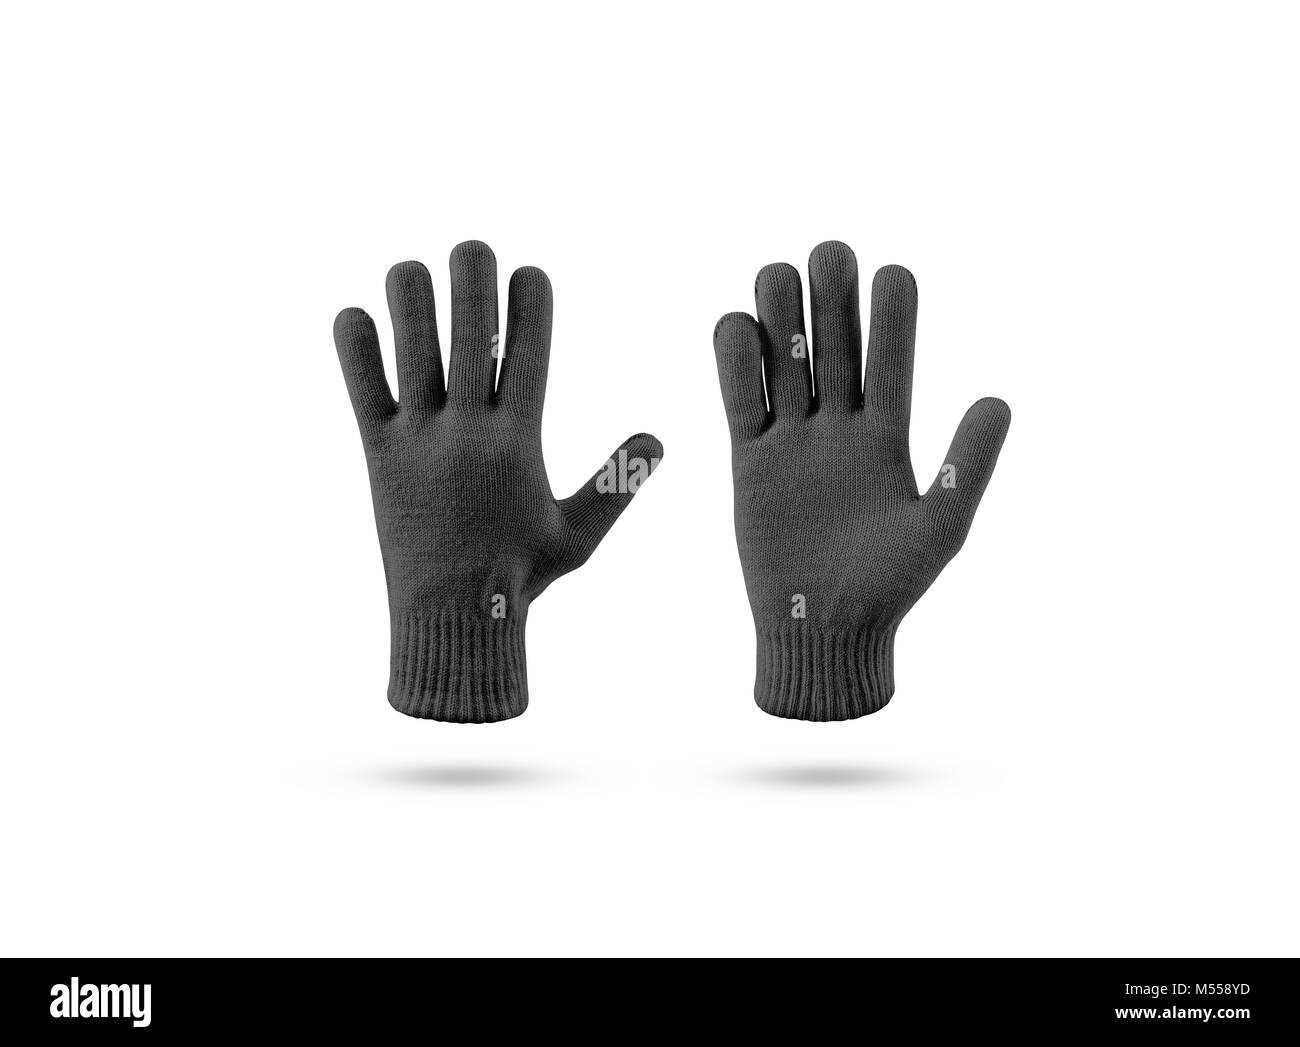 Blank black knitted winter gloves mock up set, front and back side view ...